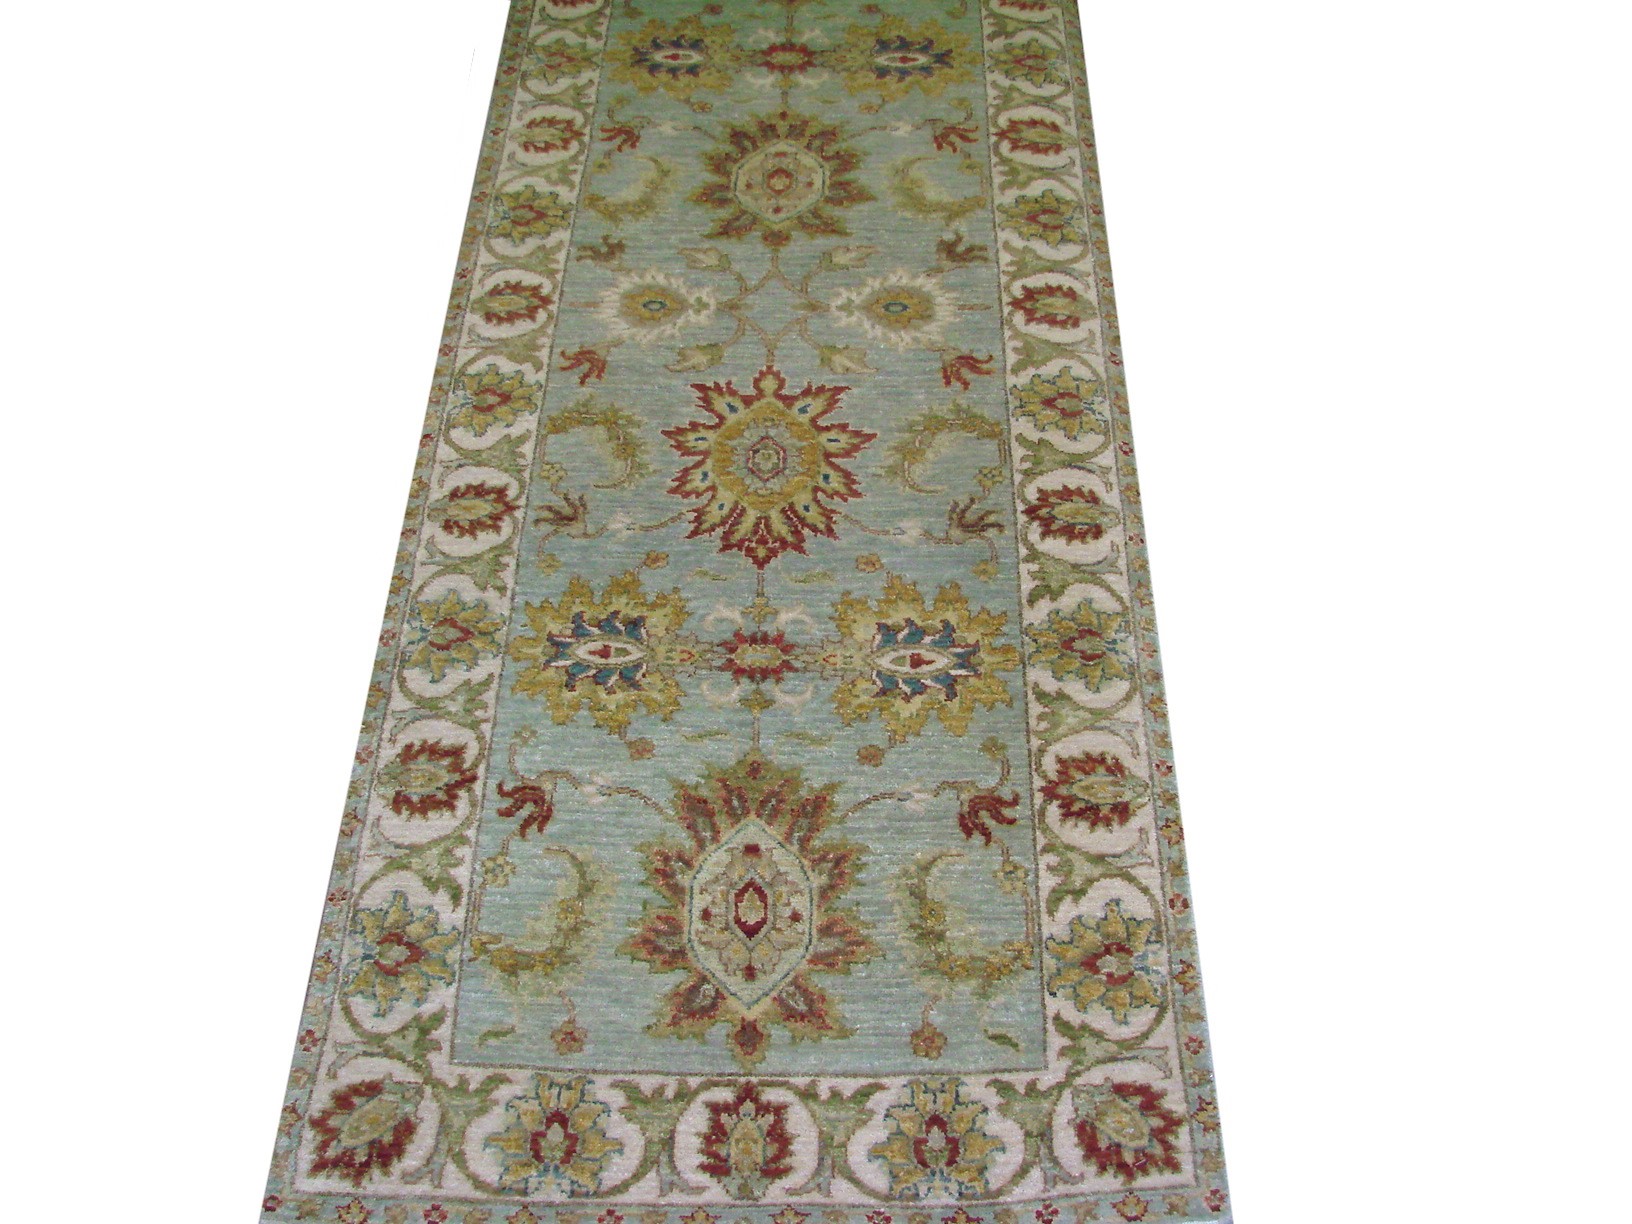 10 Runner Traditional Hand Knotted Wool Area Rug - MR022006